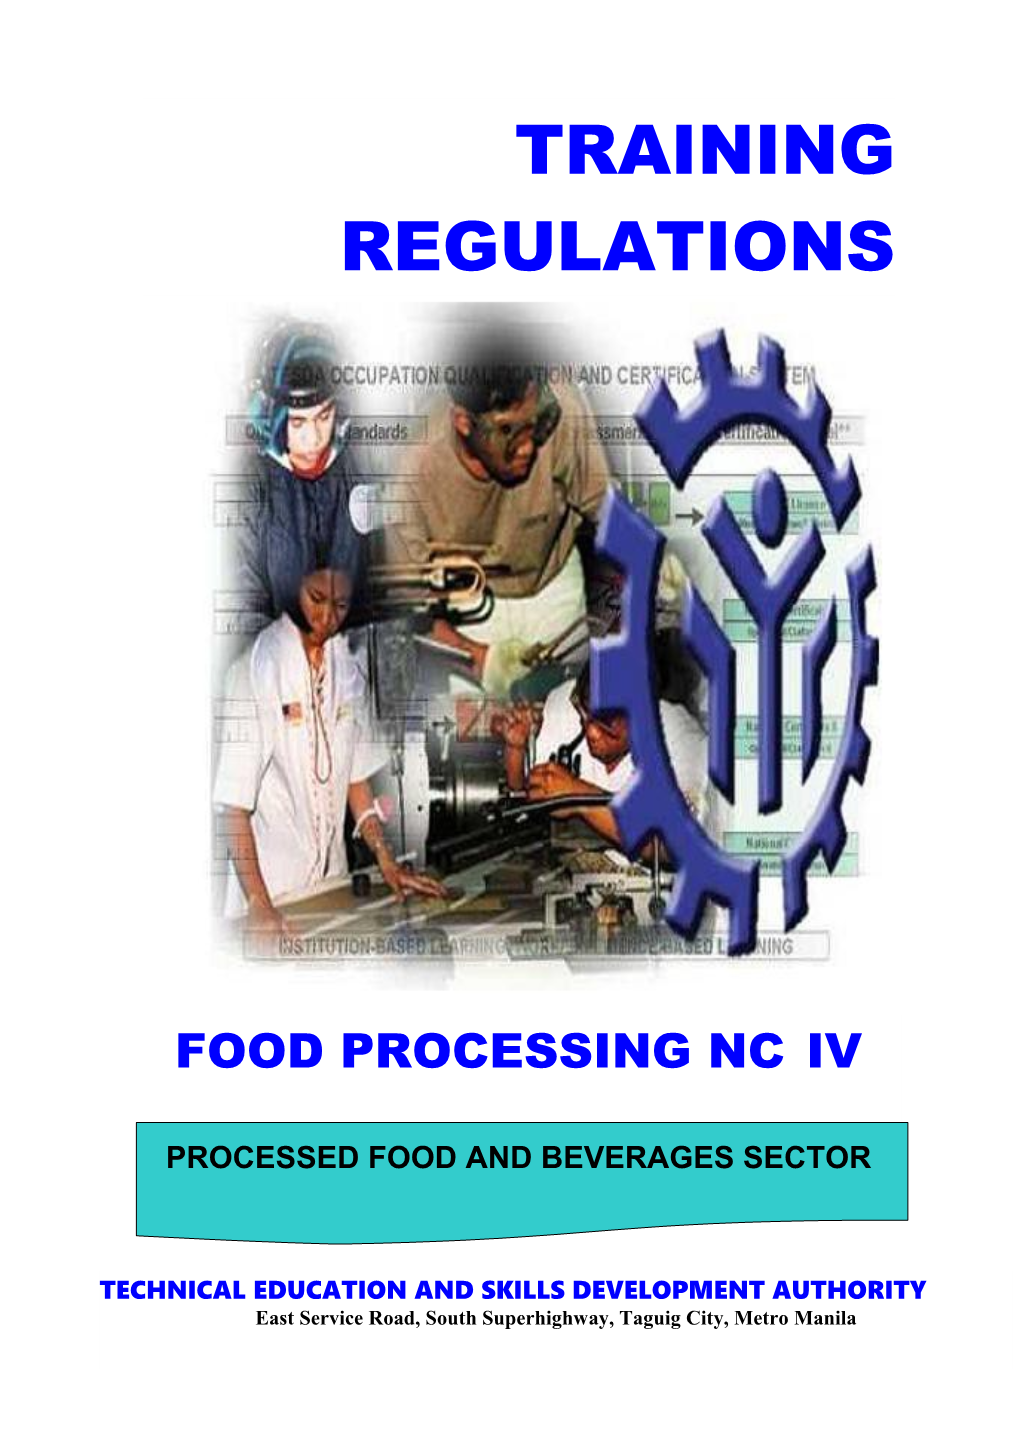 Processed Food and Beverages Sector